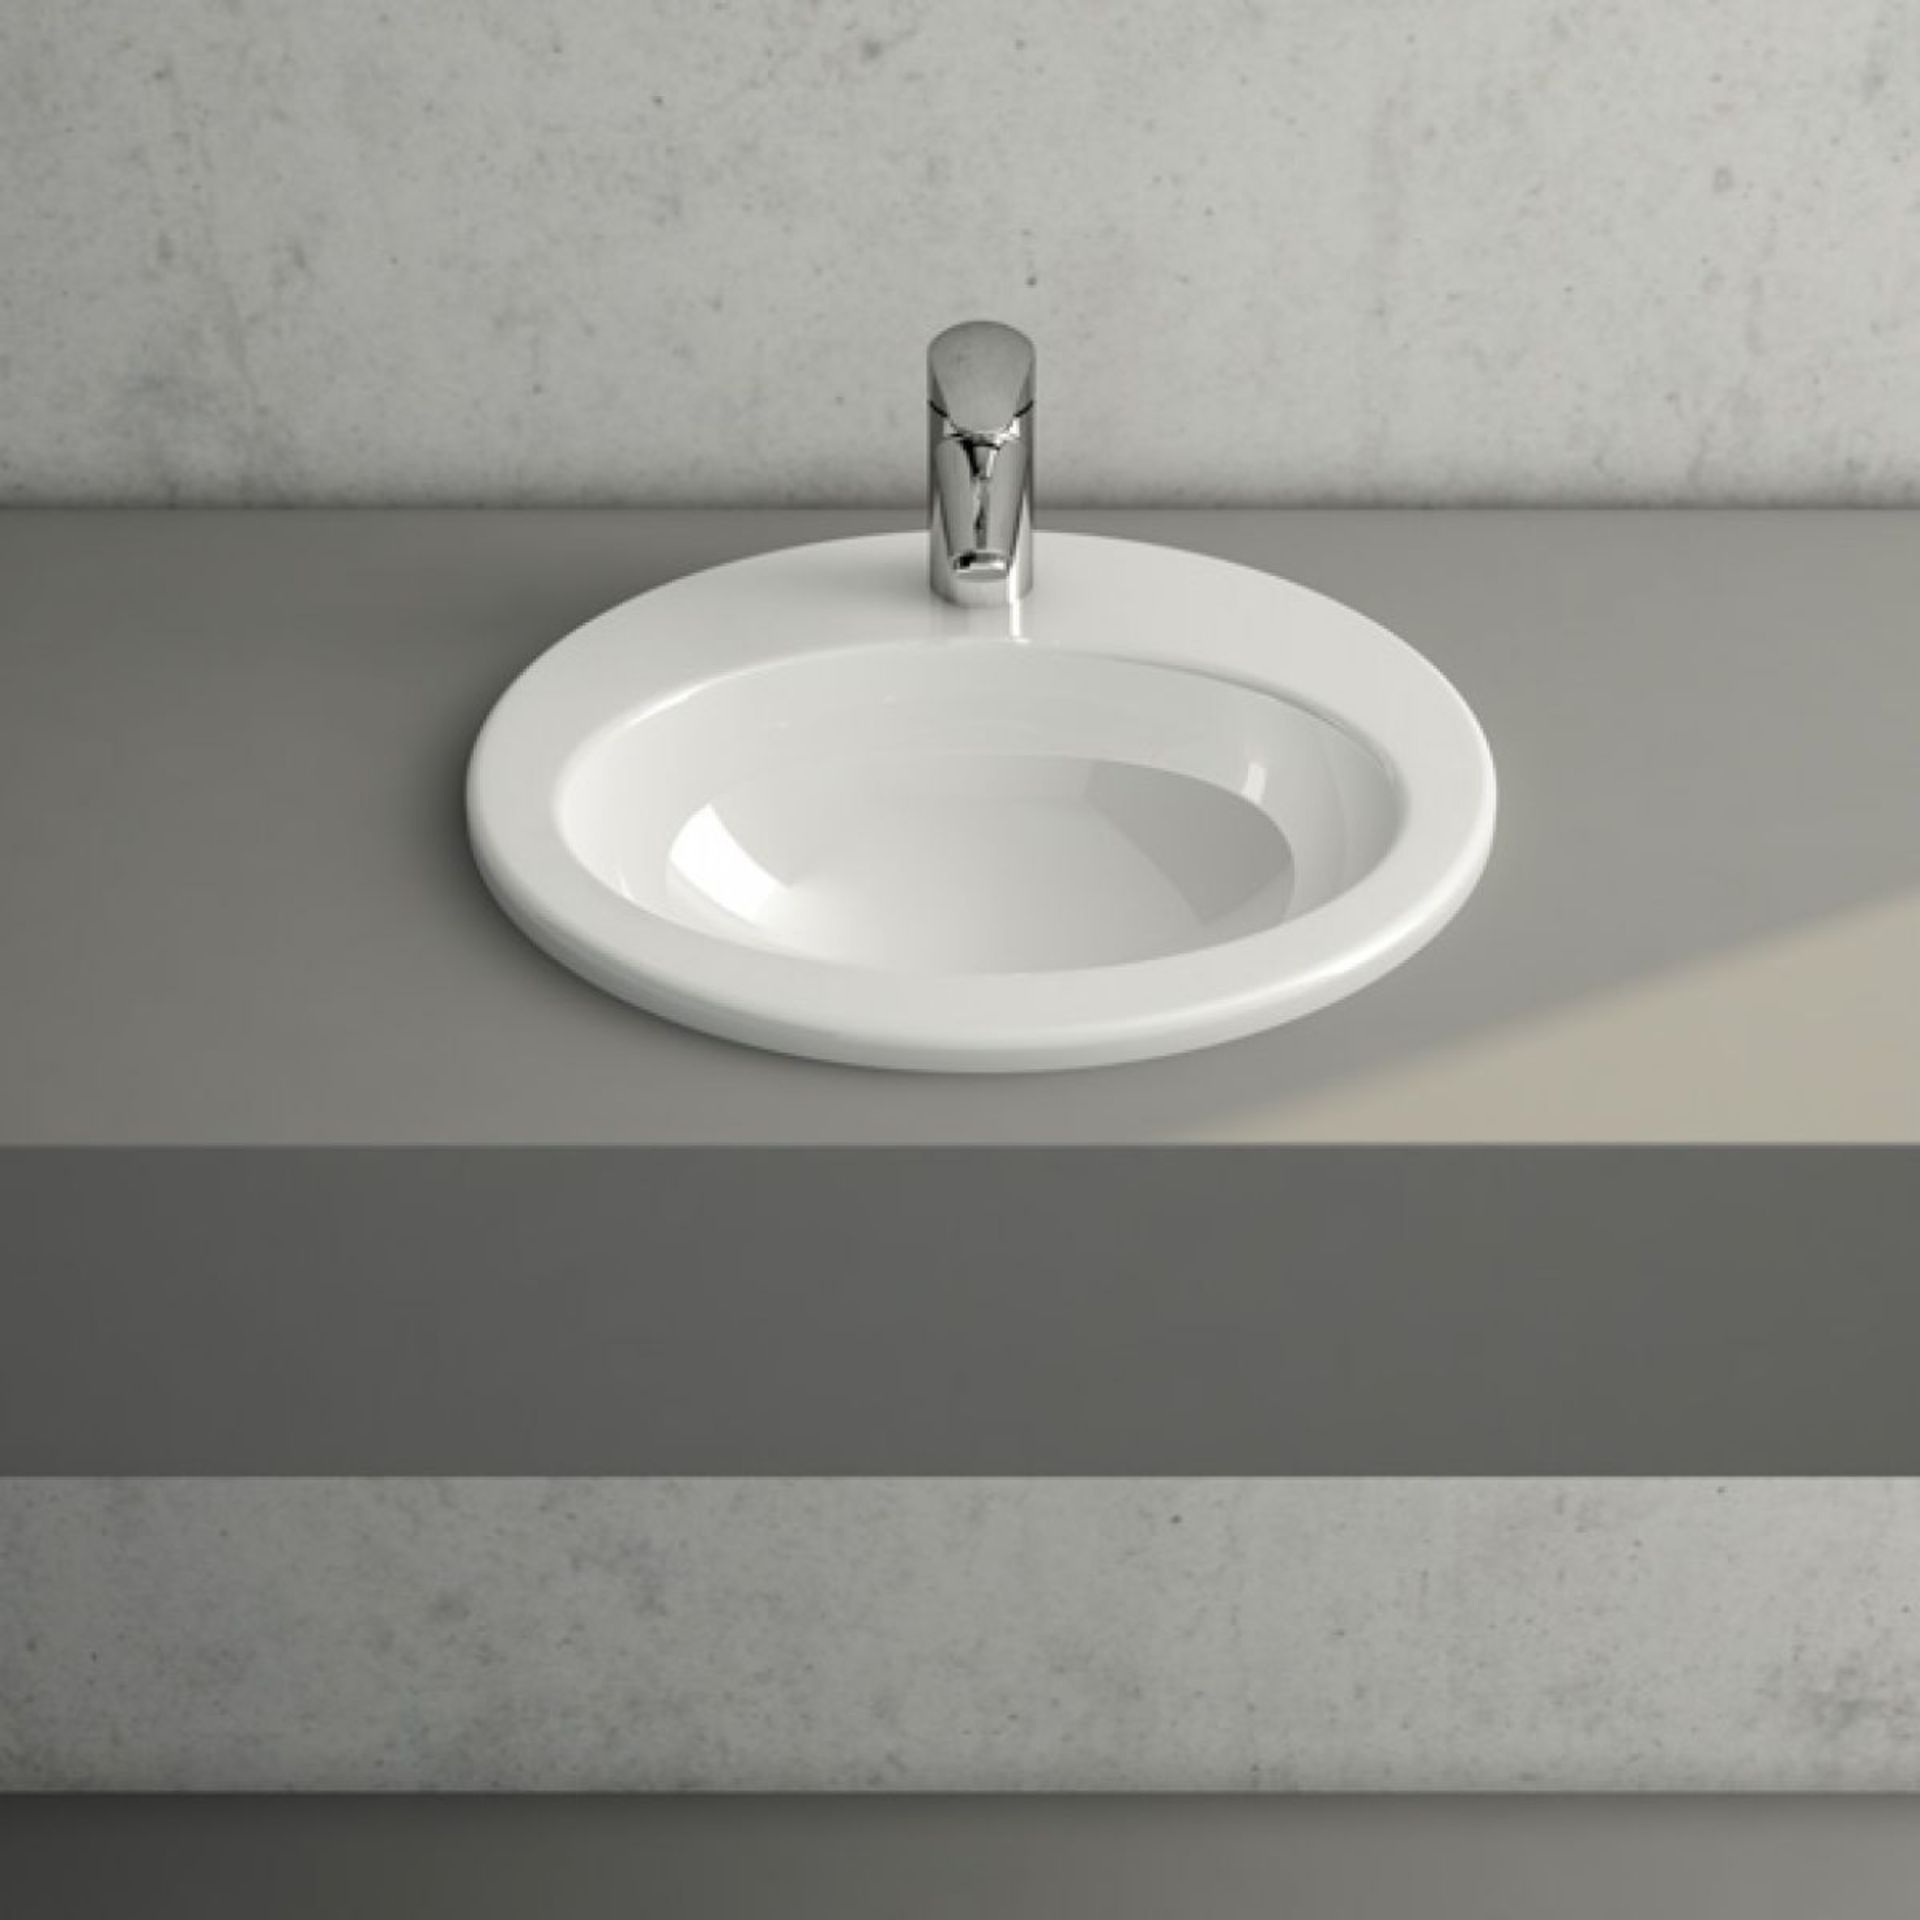 (QP220) VitrA S20 Round Inset Basin. RRP £103.99. This VitrA S20 basin has been carefully desi...((